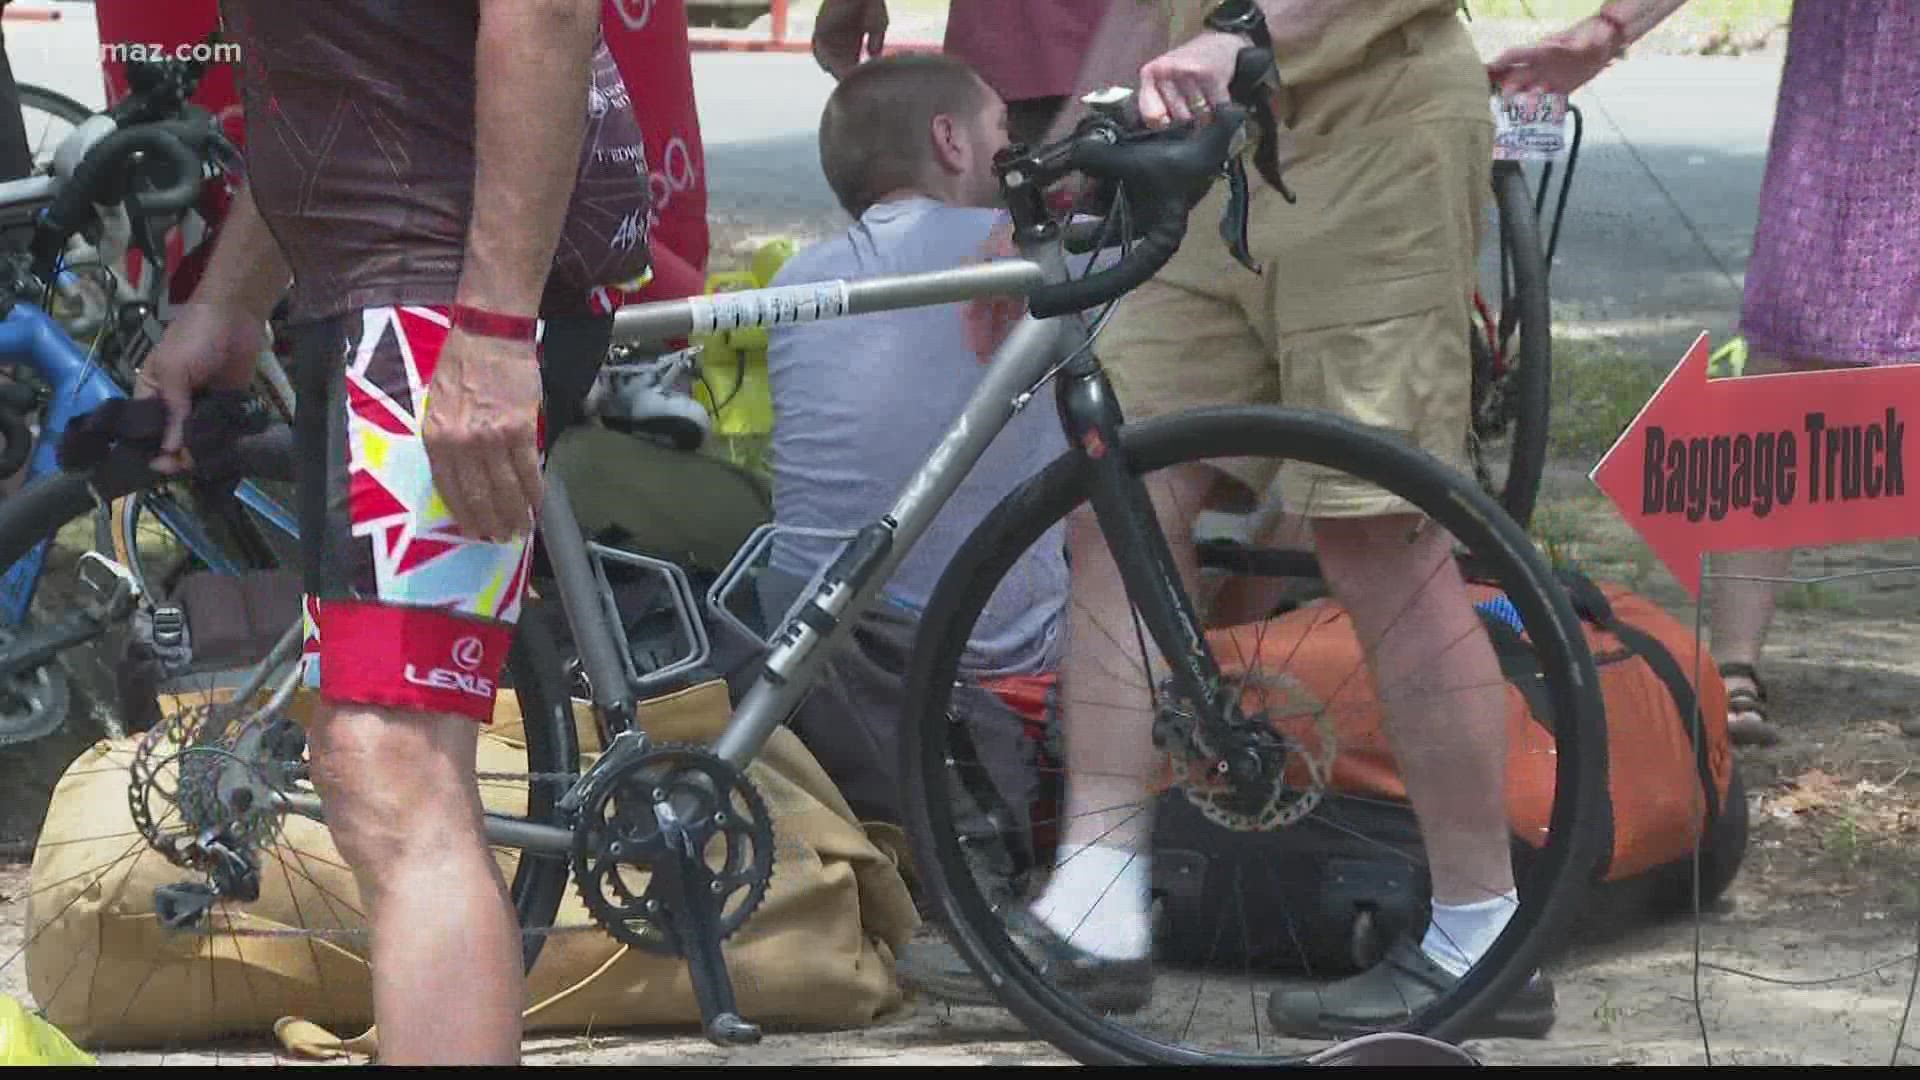 Hundreds of bicyclists pedaled into Dublin for the 'Bicycle Ride Across Georgia' ride and will camp out at Stubbs Park for 3 days.